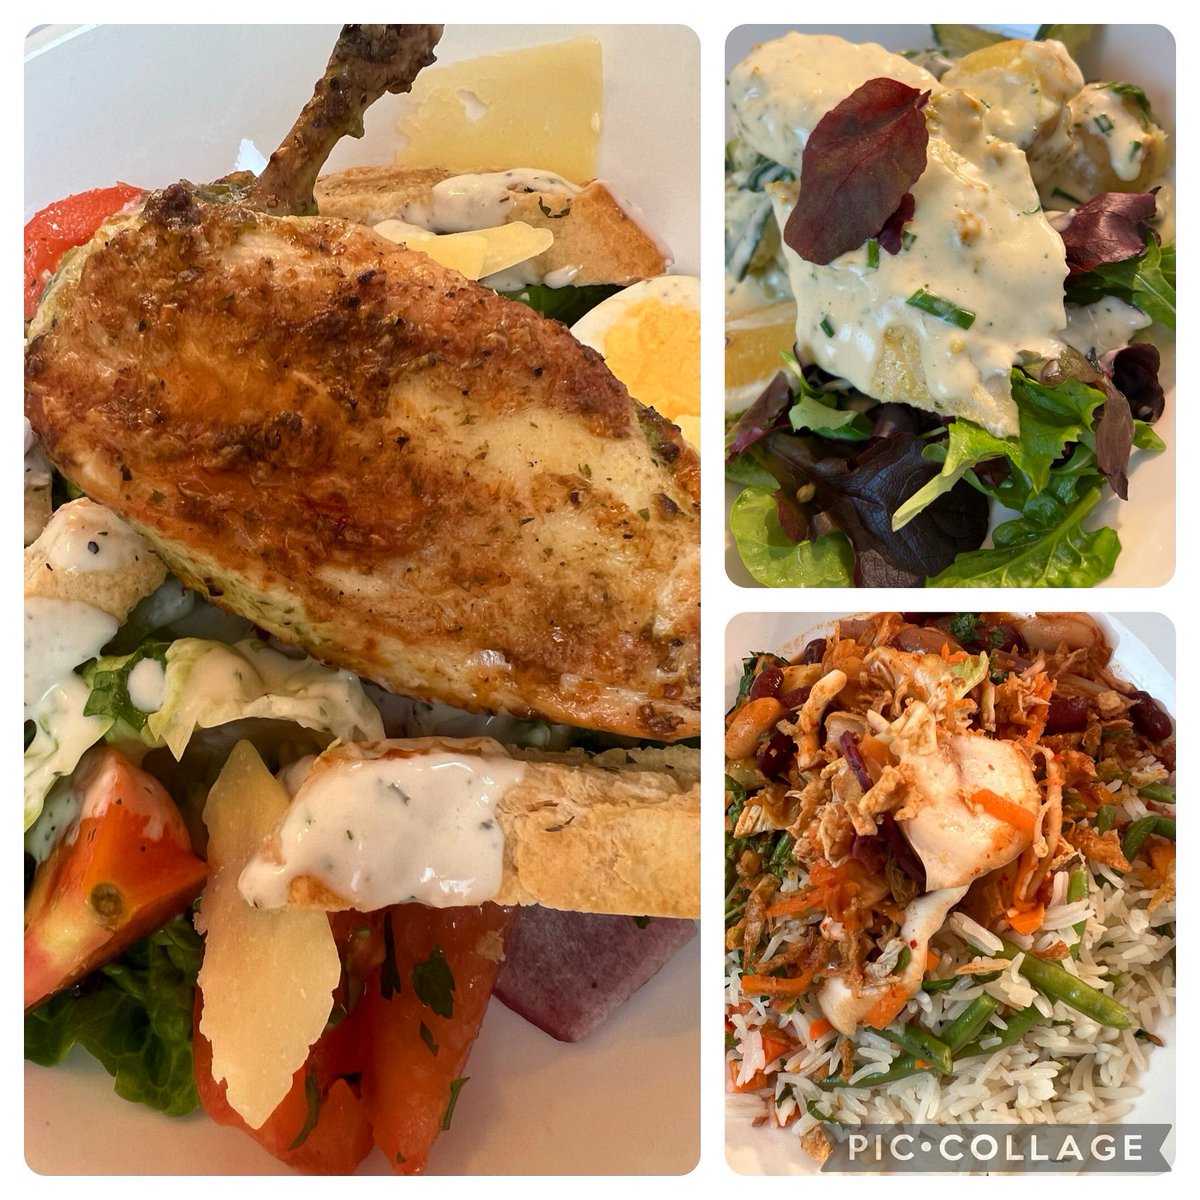 On todays menu in the EDUkitchen at St Peter’s we are serving: -Chicken Caesar Salad, Egg, Parmesan & Croutons -Baked Tilapia Fish, Roasted Courgette, New Potatoes & Cream Chive Sauce -Braised Jackfruit, Coconut Rice & Kimchi @LoveBritishFood #greathospitalfood